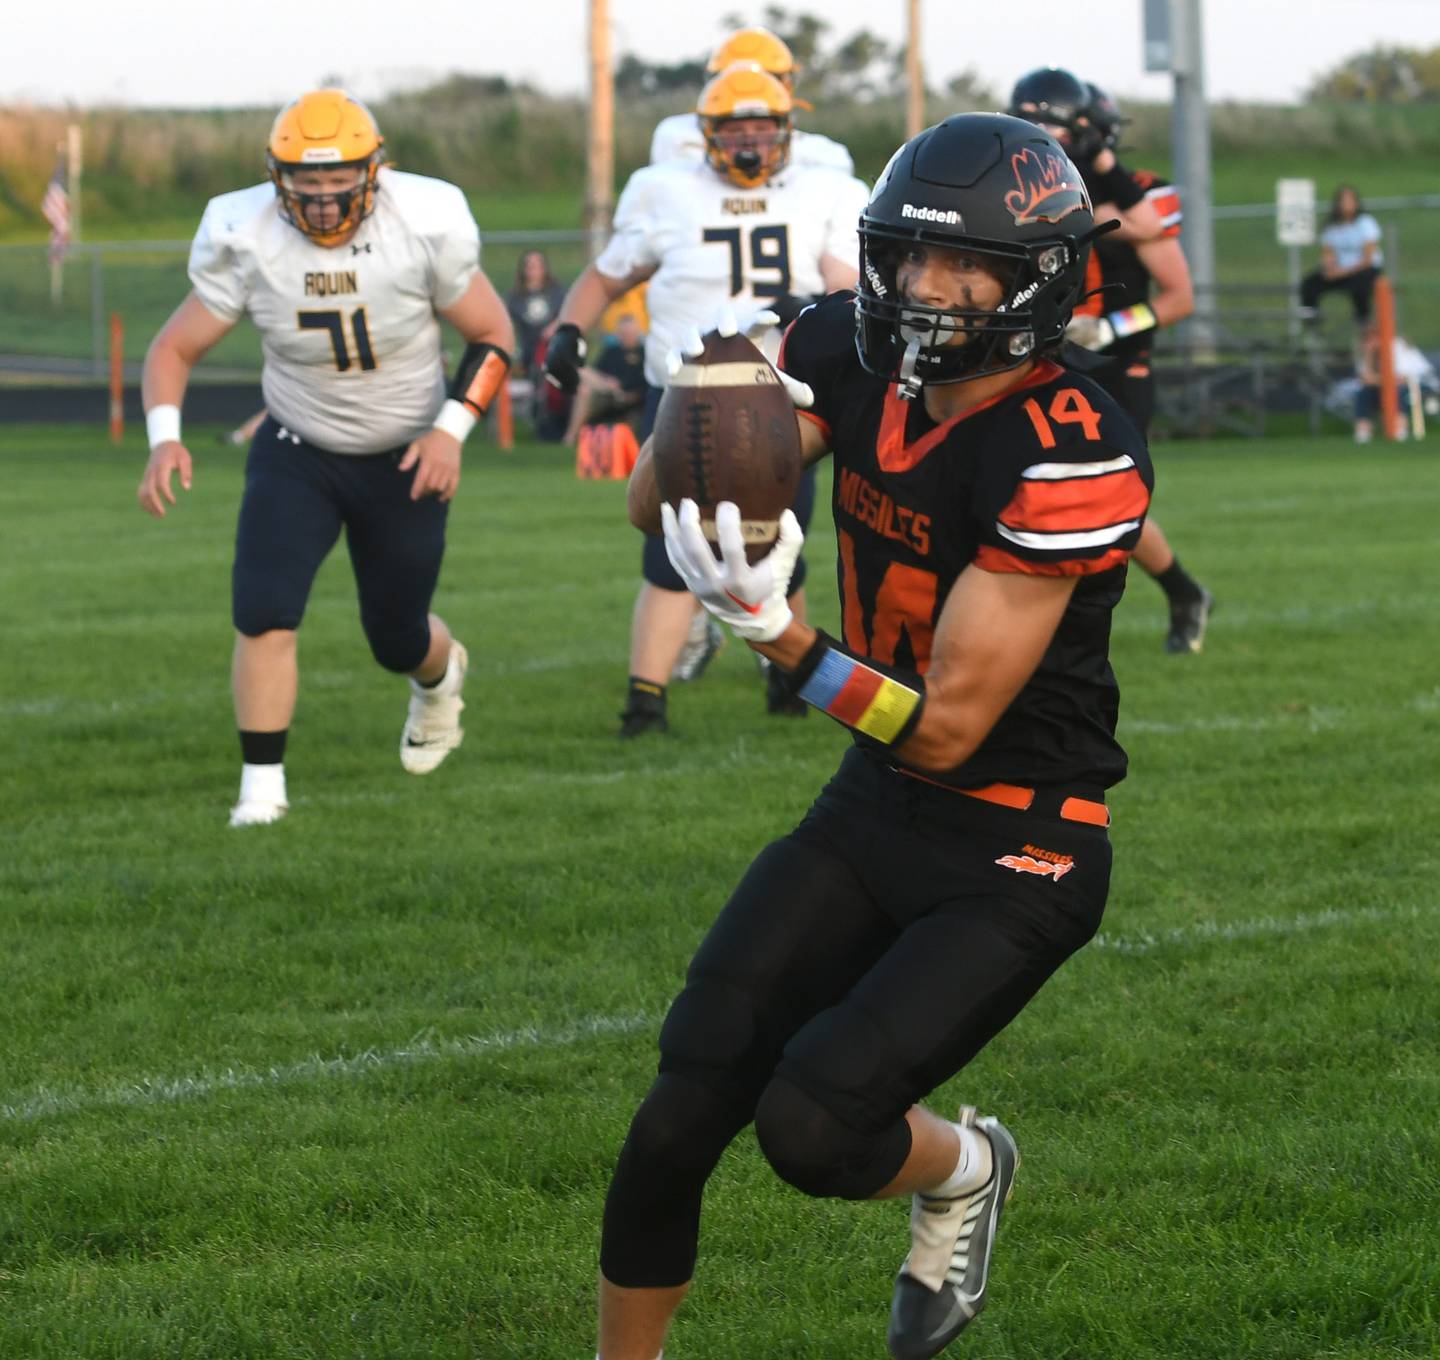 Milledgeville's Kacen Johnson squeezes a pass for a completion against Freeport Aquin.